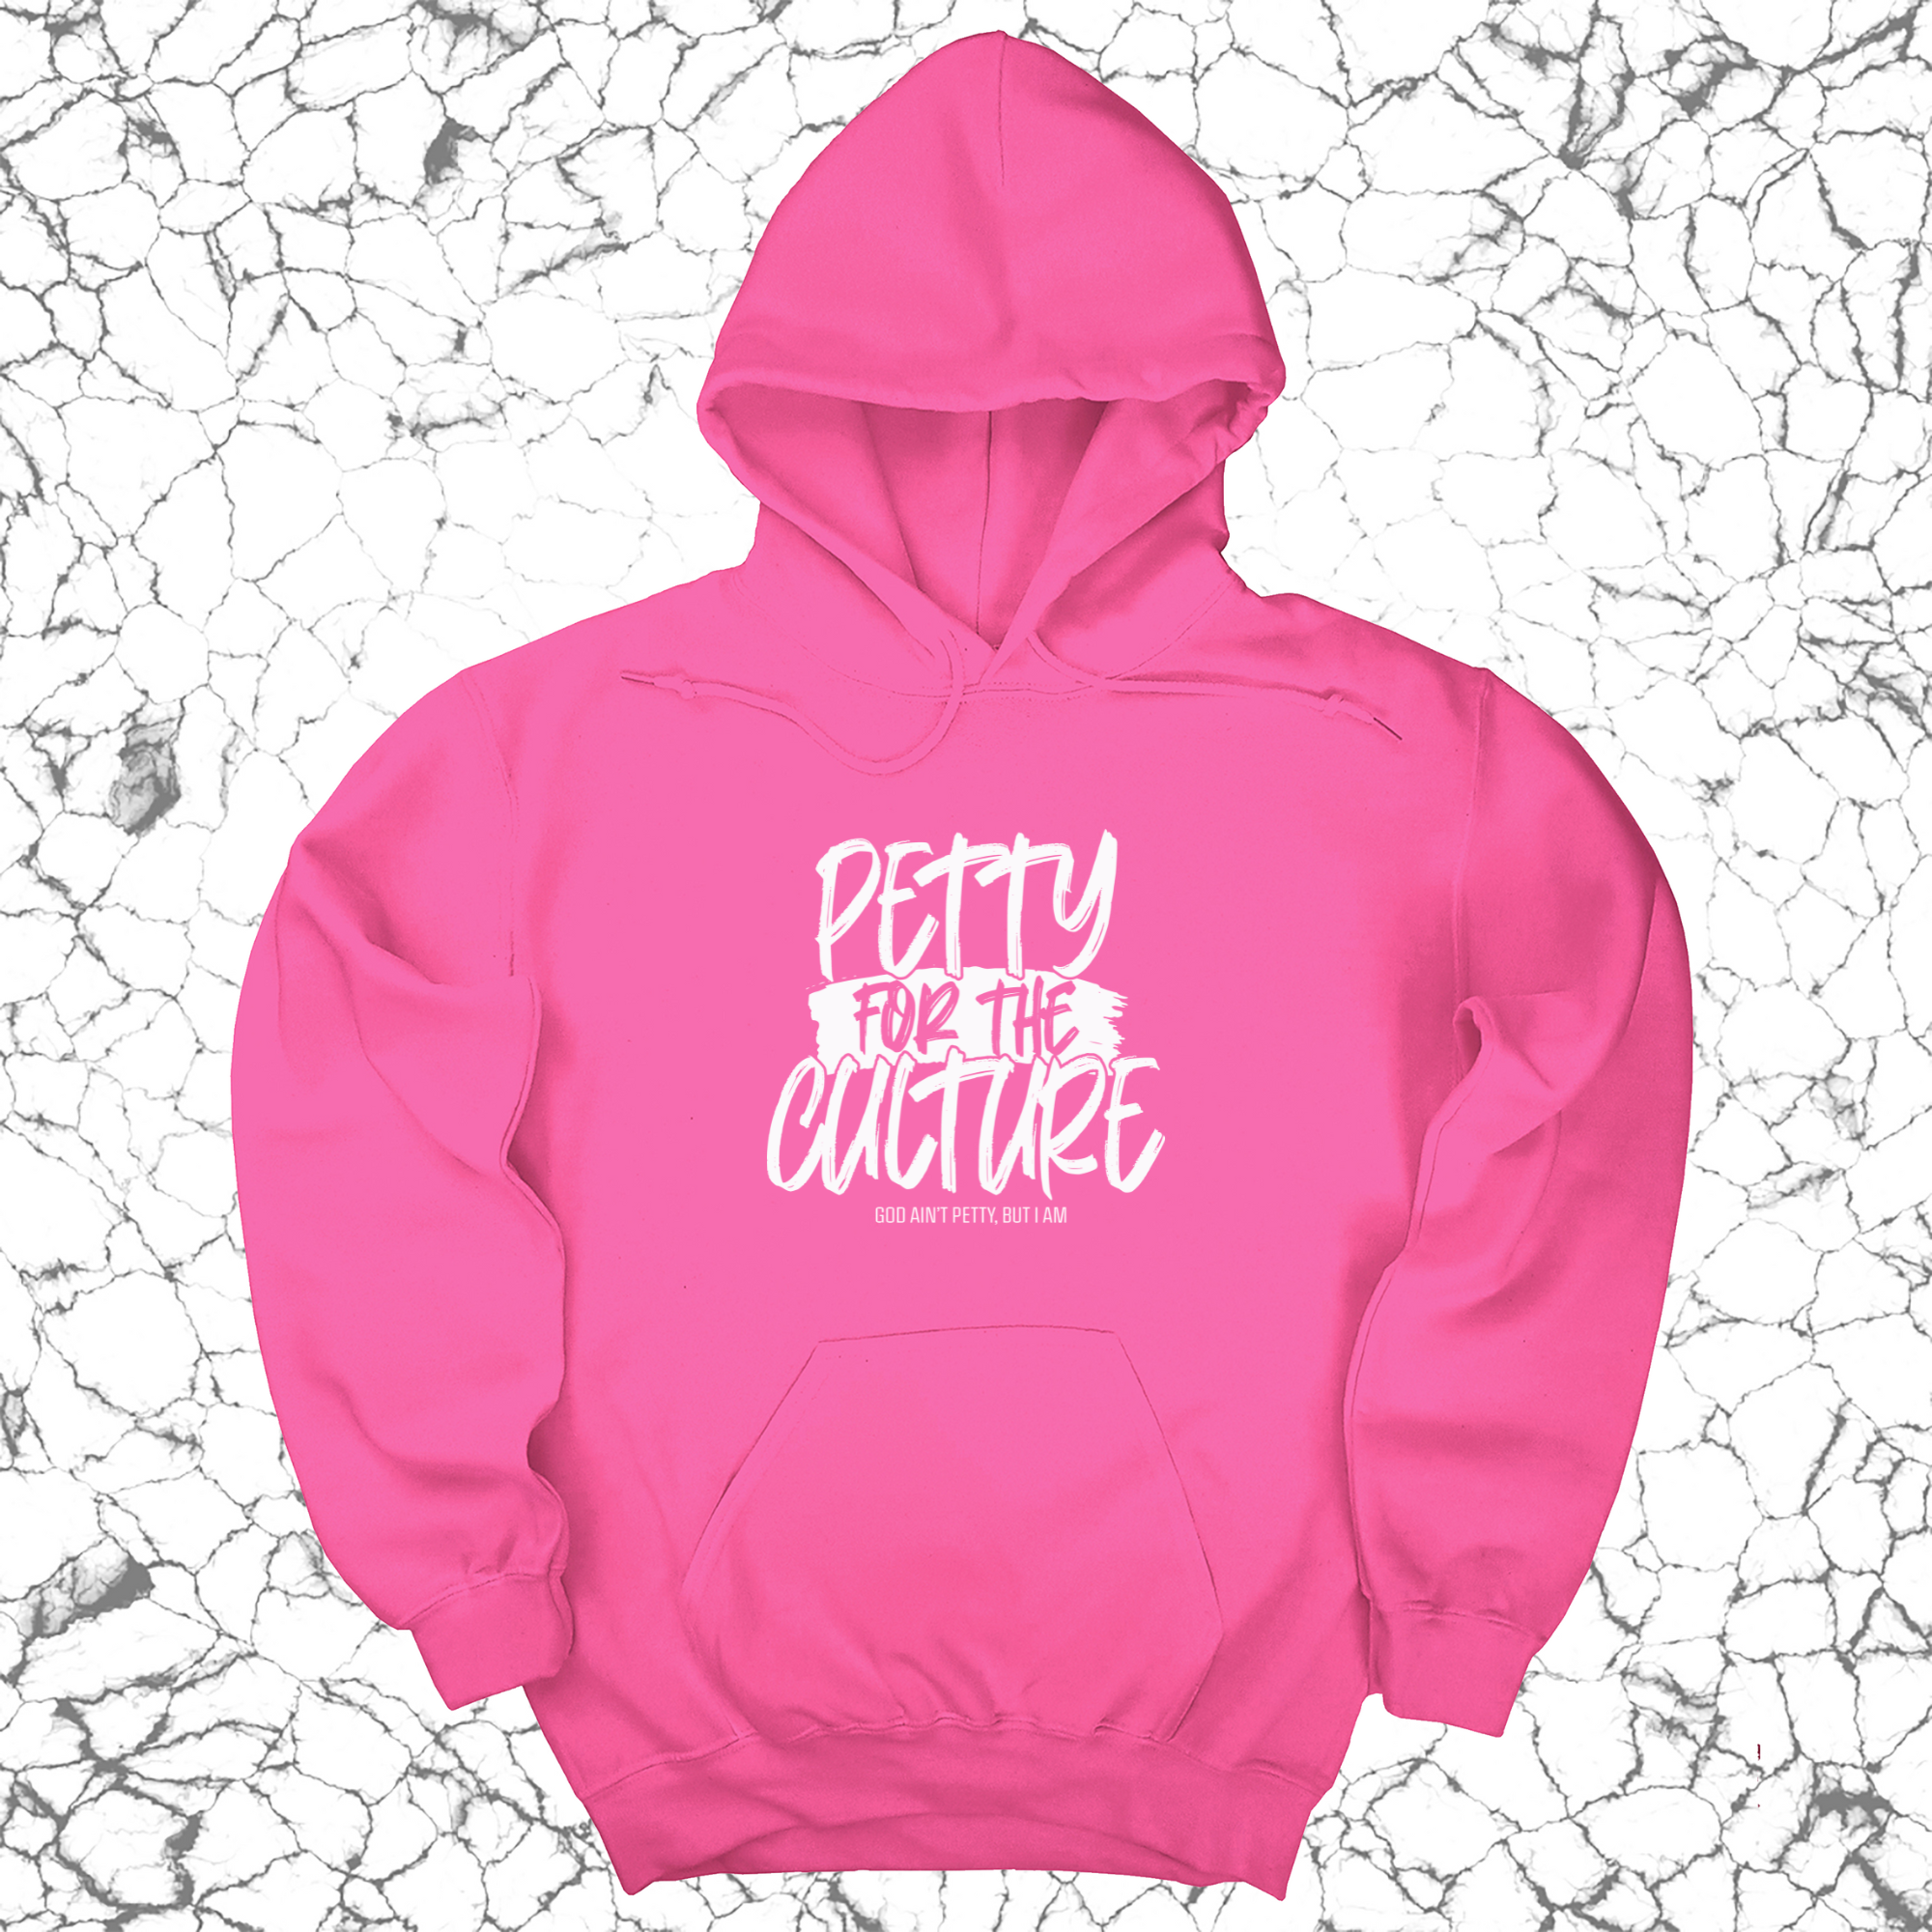 Petty for the culture Unisex Hoodie-Hoodie-The Original God Ain't Petty But I Am